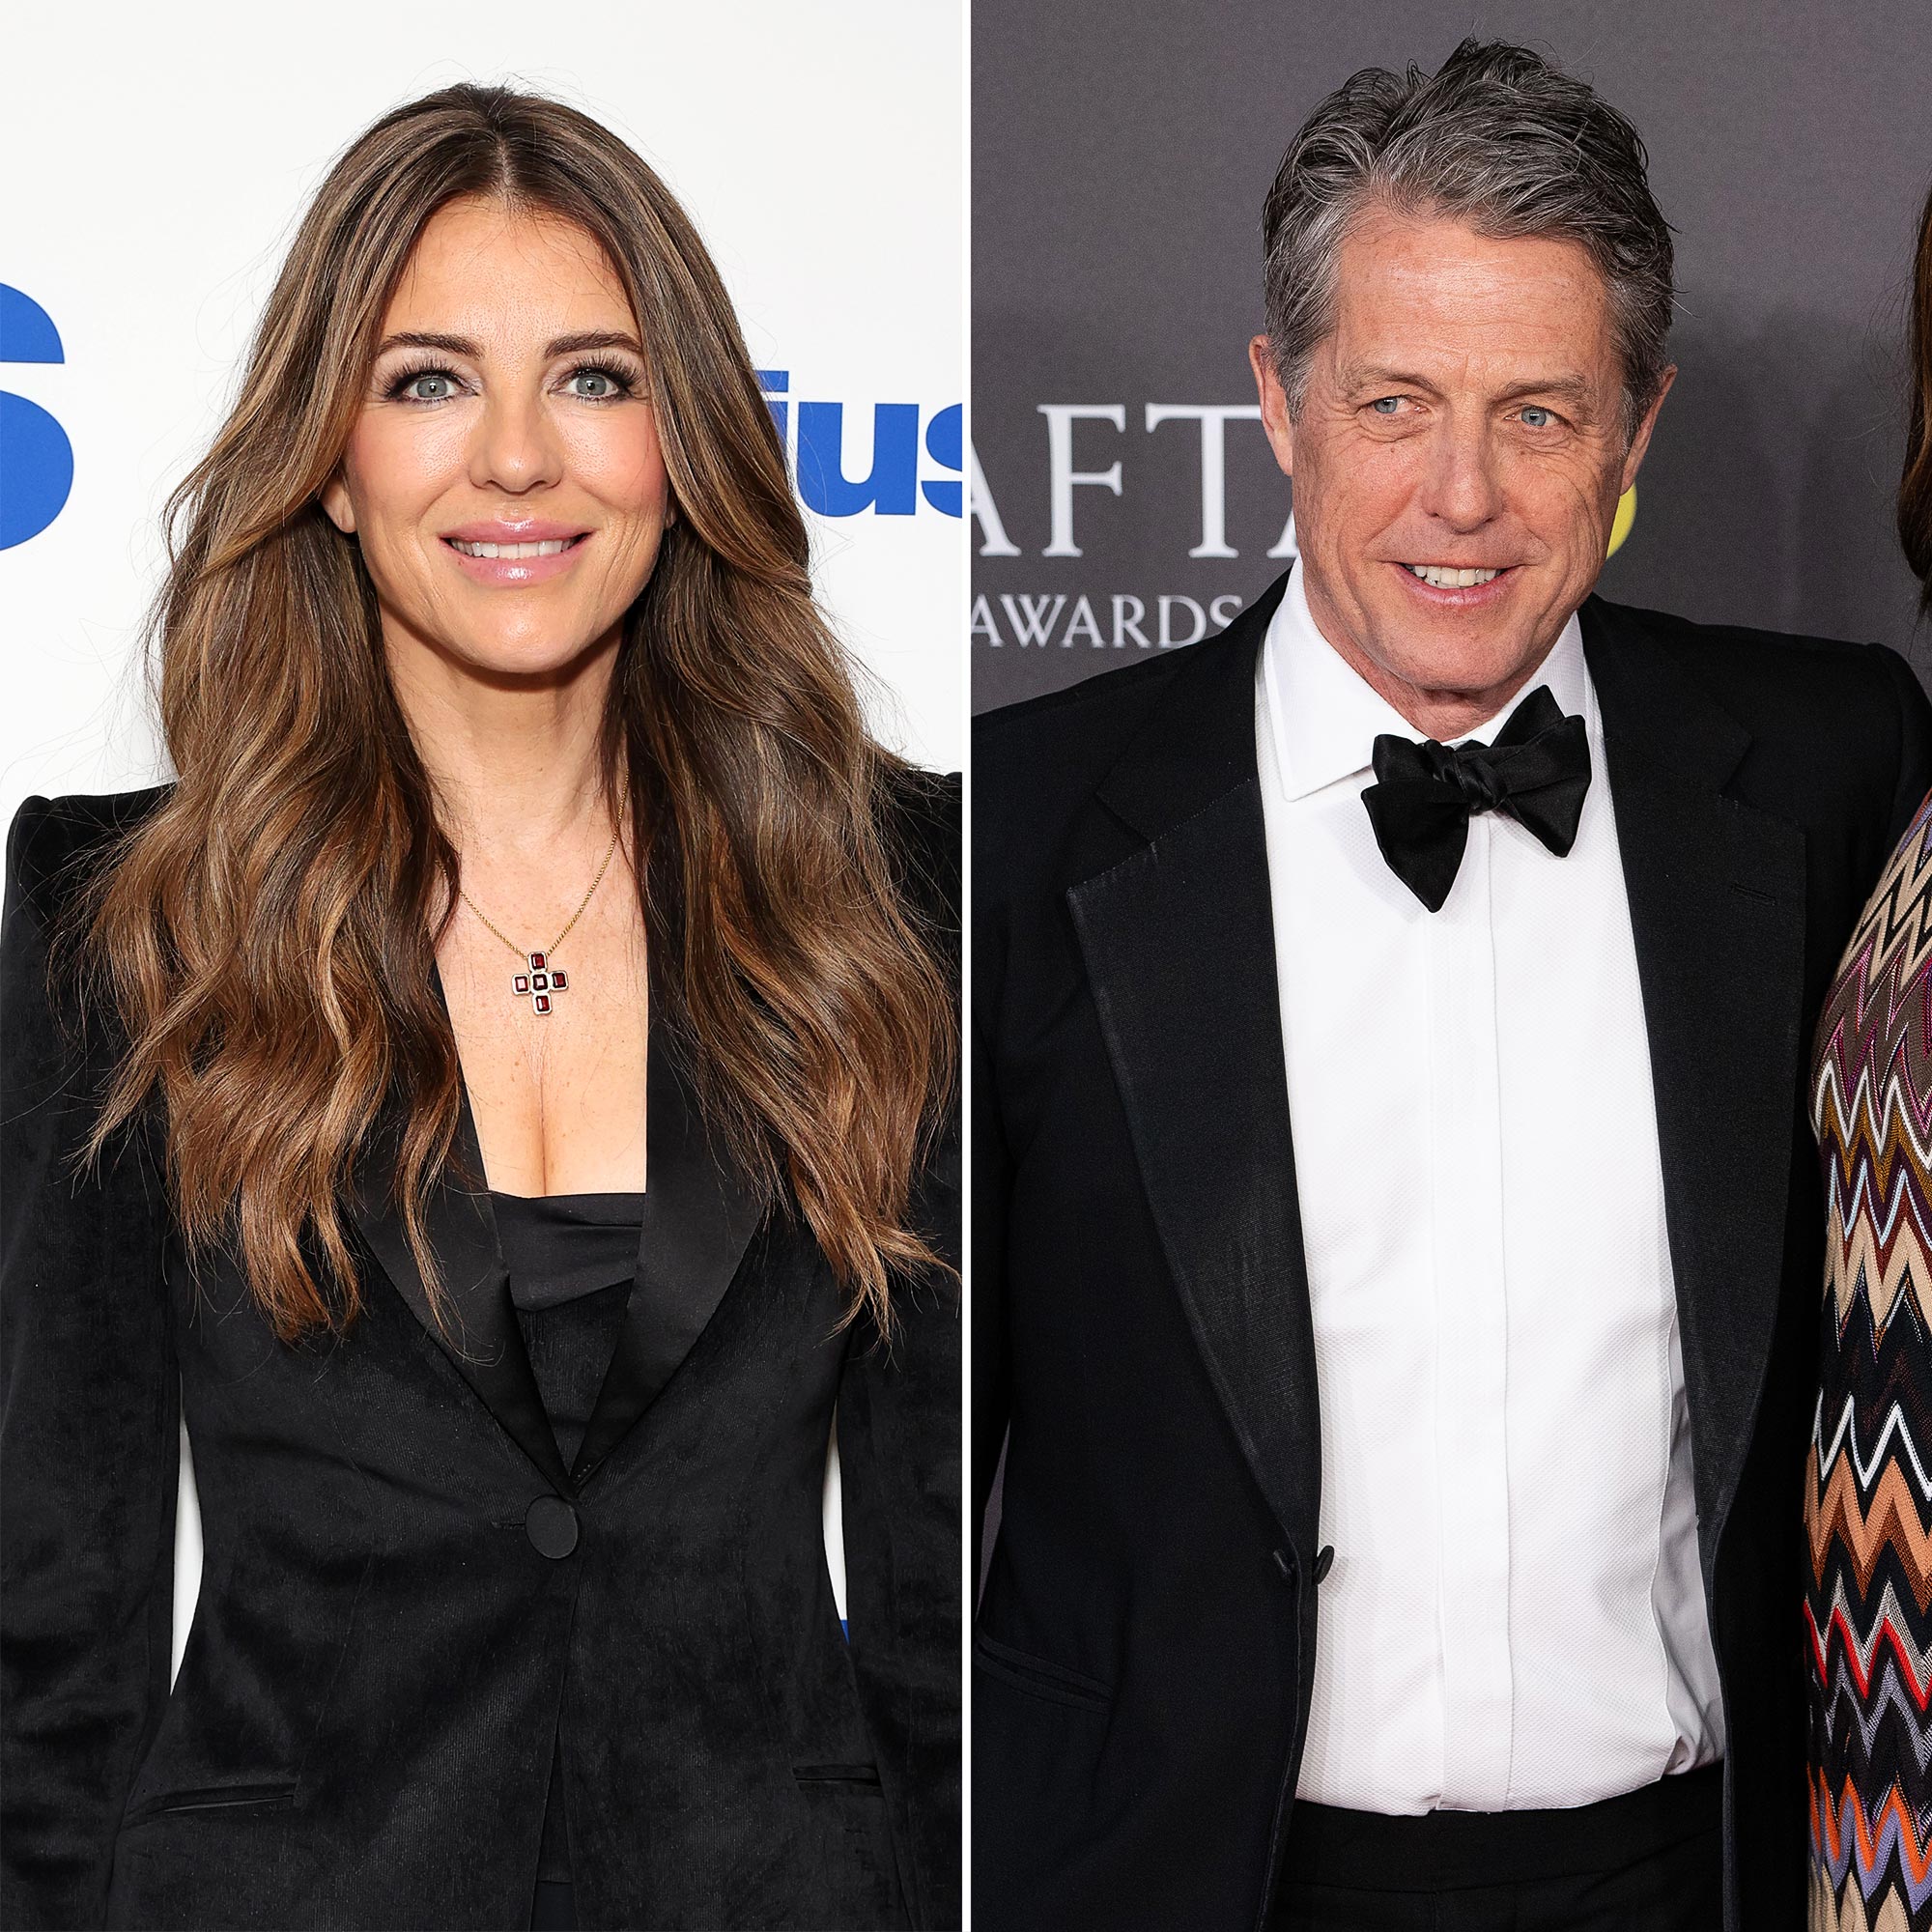 Elizabeth Hurley Says She and Ex Hugh Grant Used to Fight All Day About Having Kids 342